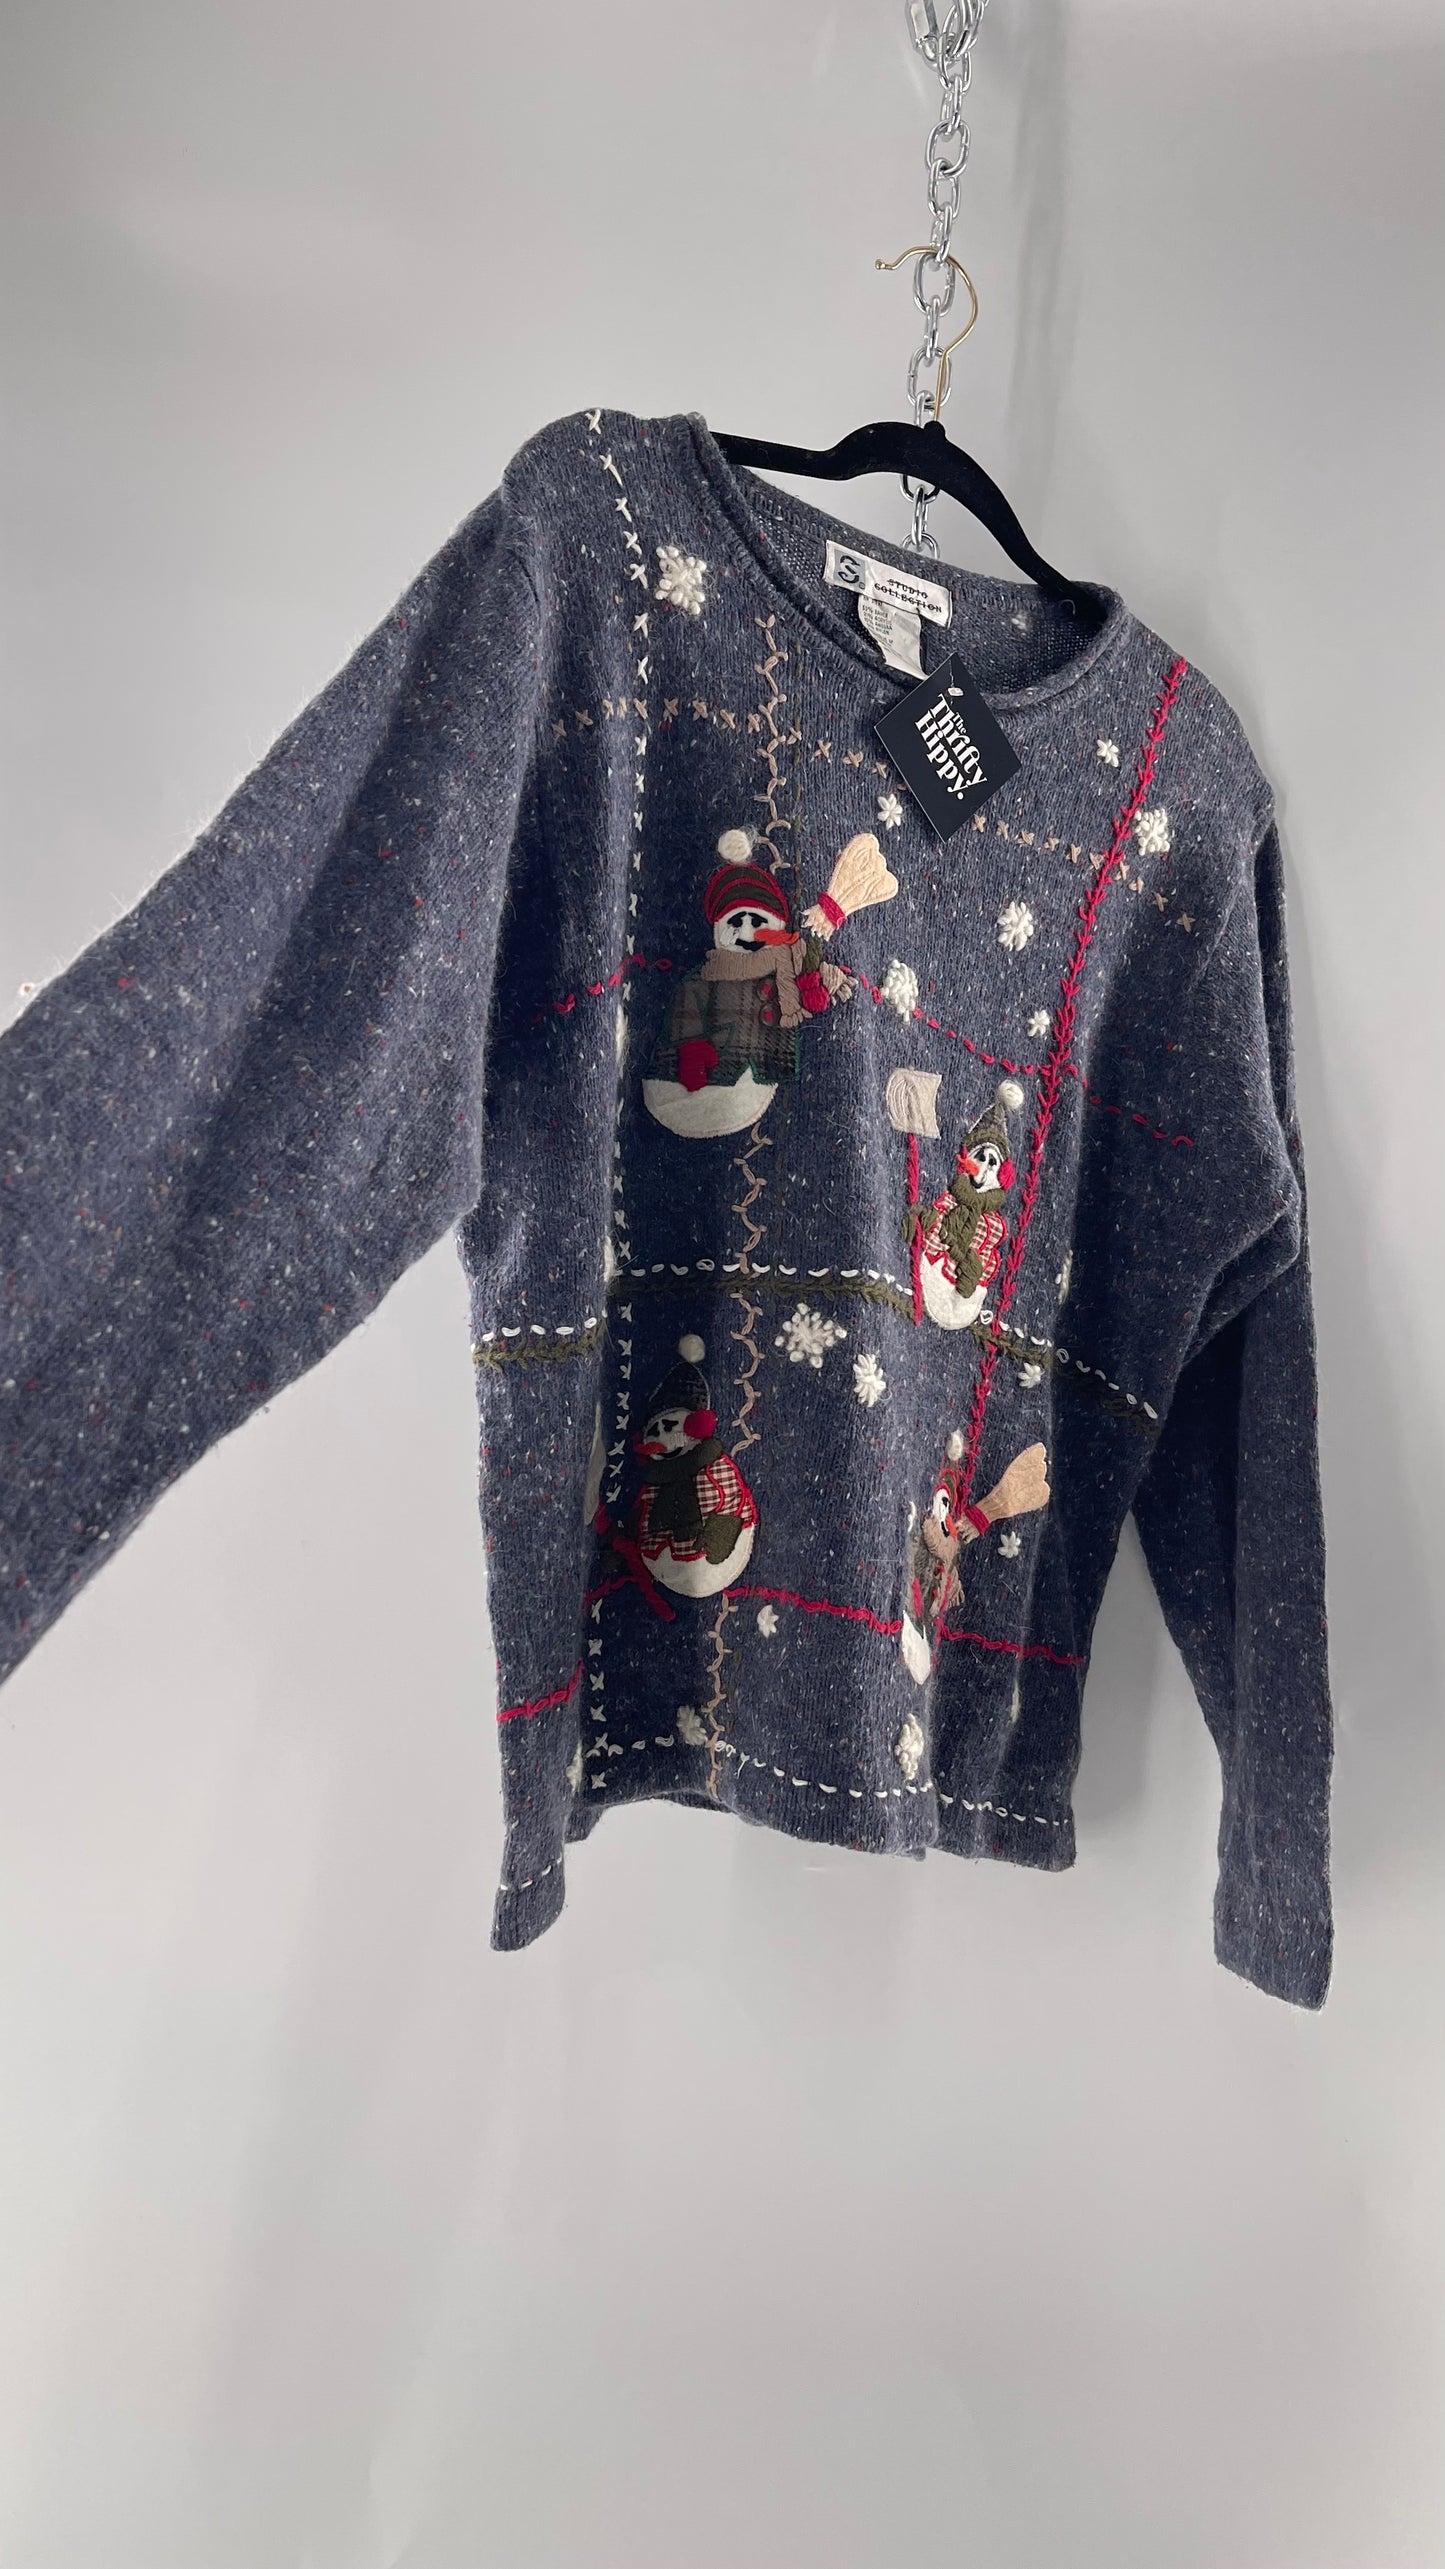 Vintage Urban Outfitters Christmas/Holiday Sweater with Festive Snowmen Snowflakes, and Contrast Stitch Detail  (S)